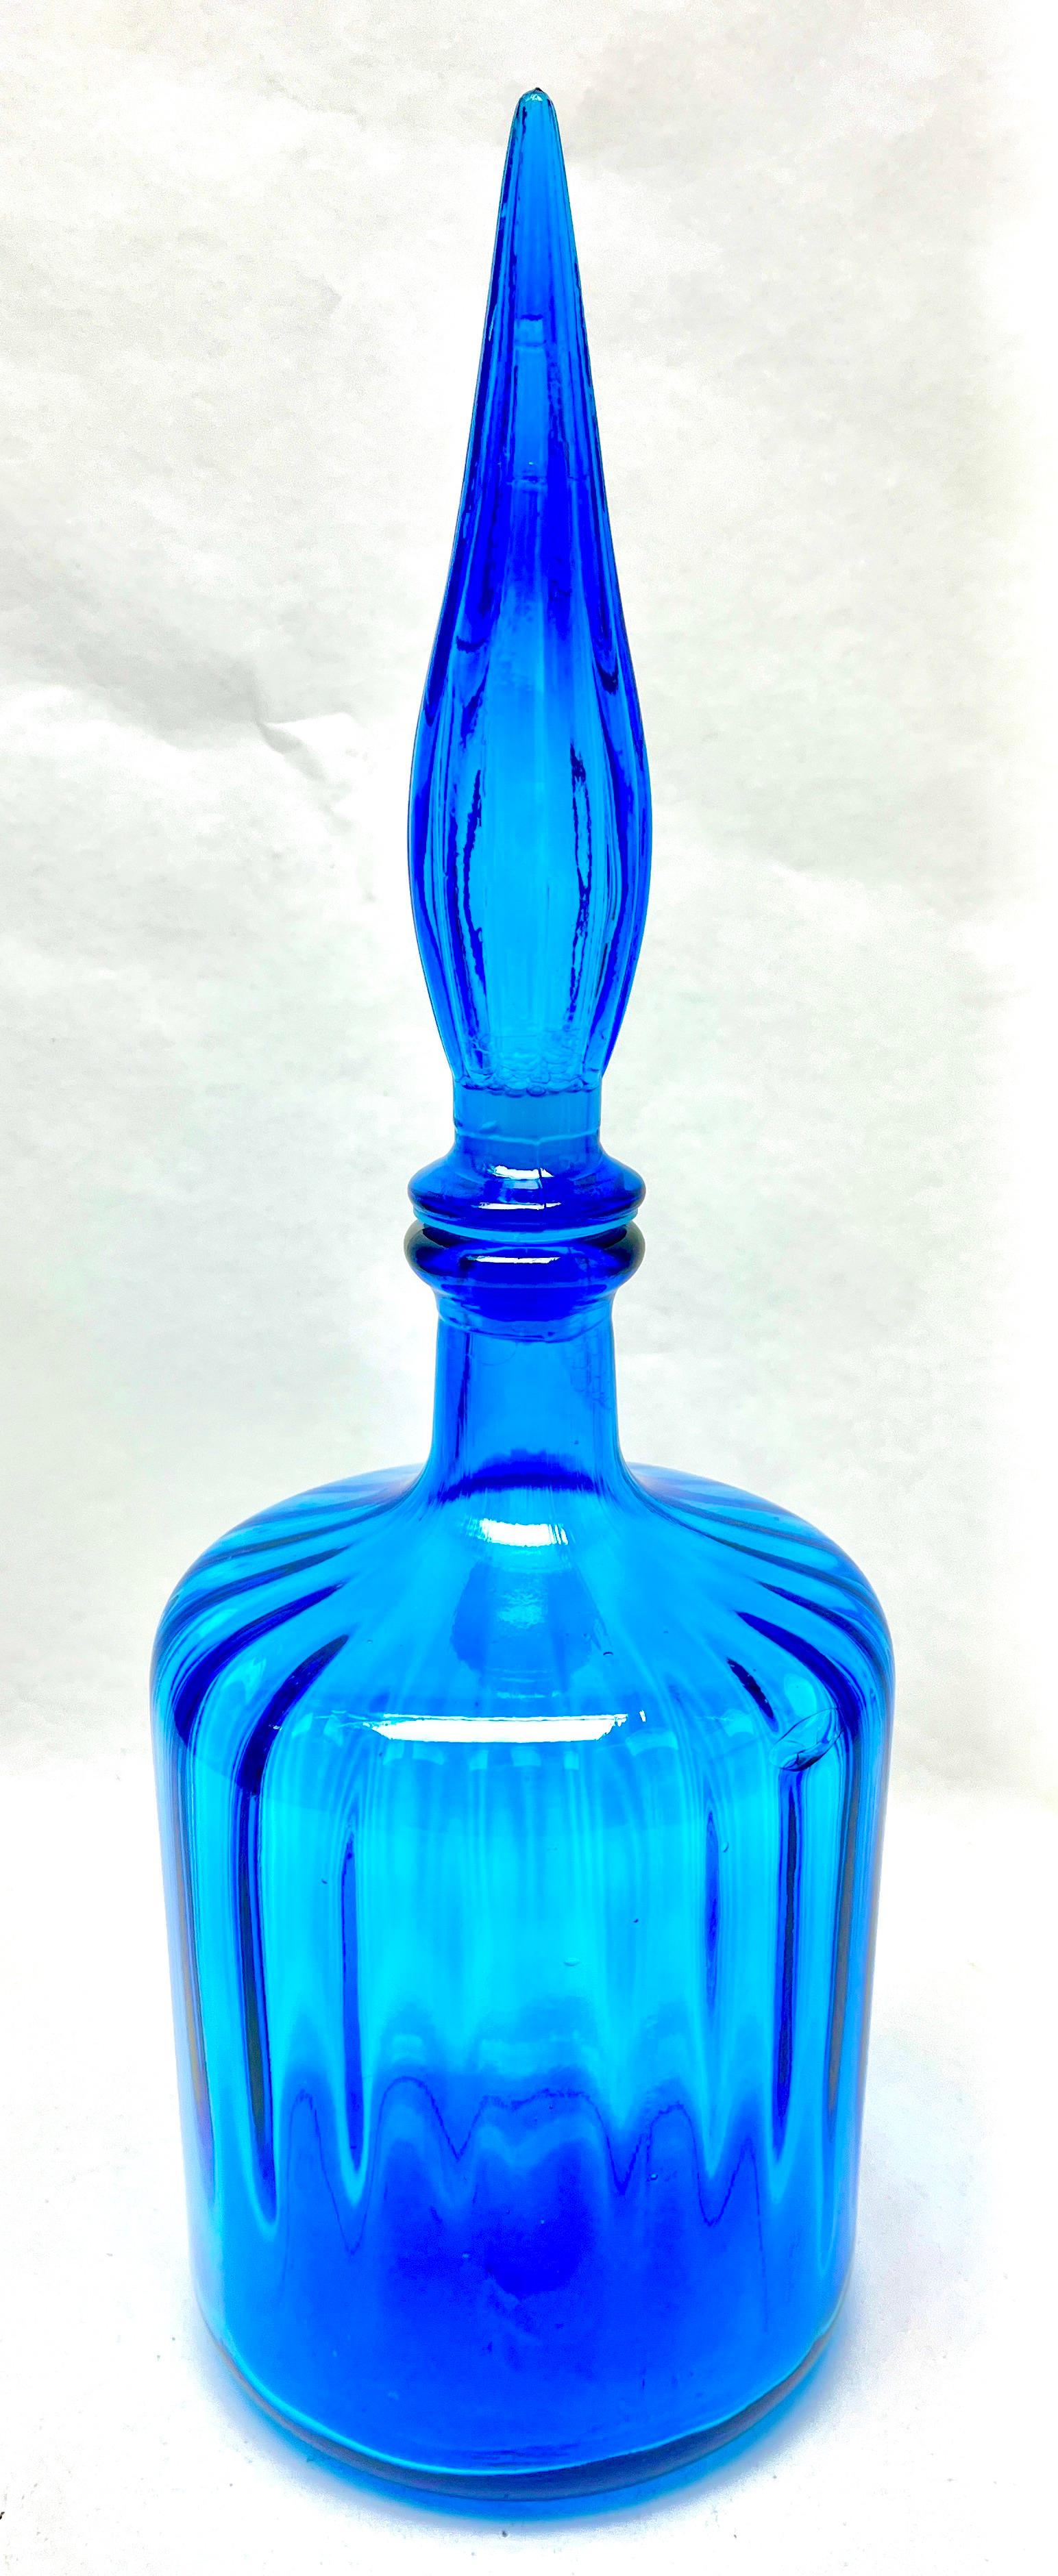 Vintage Italian Empoli Murano cased art glass Decanter.

Hand blown cased glass pitcher made in the Mid-1955s by the Italian firm Empoli. 
Excellent condition!





